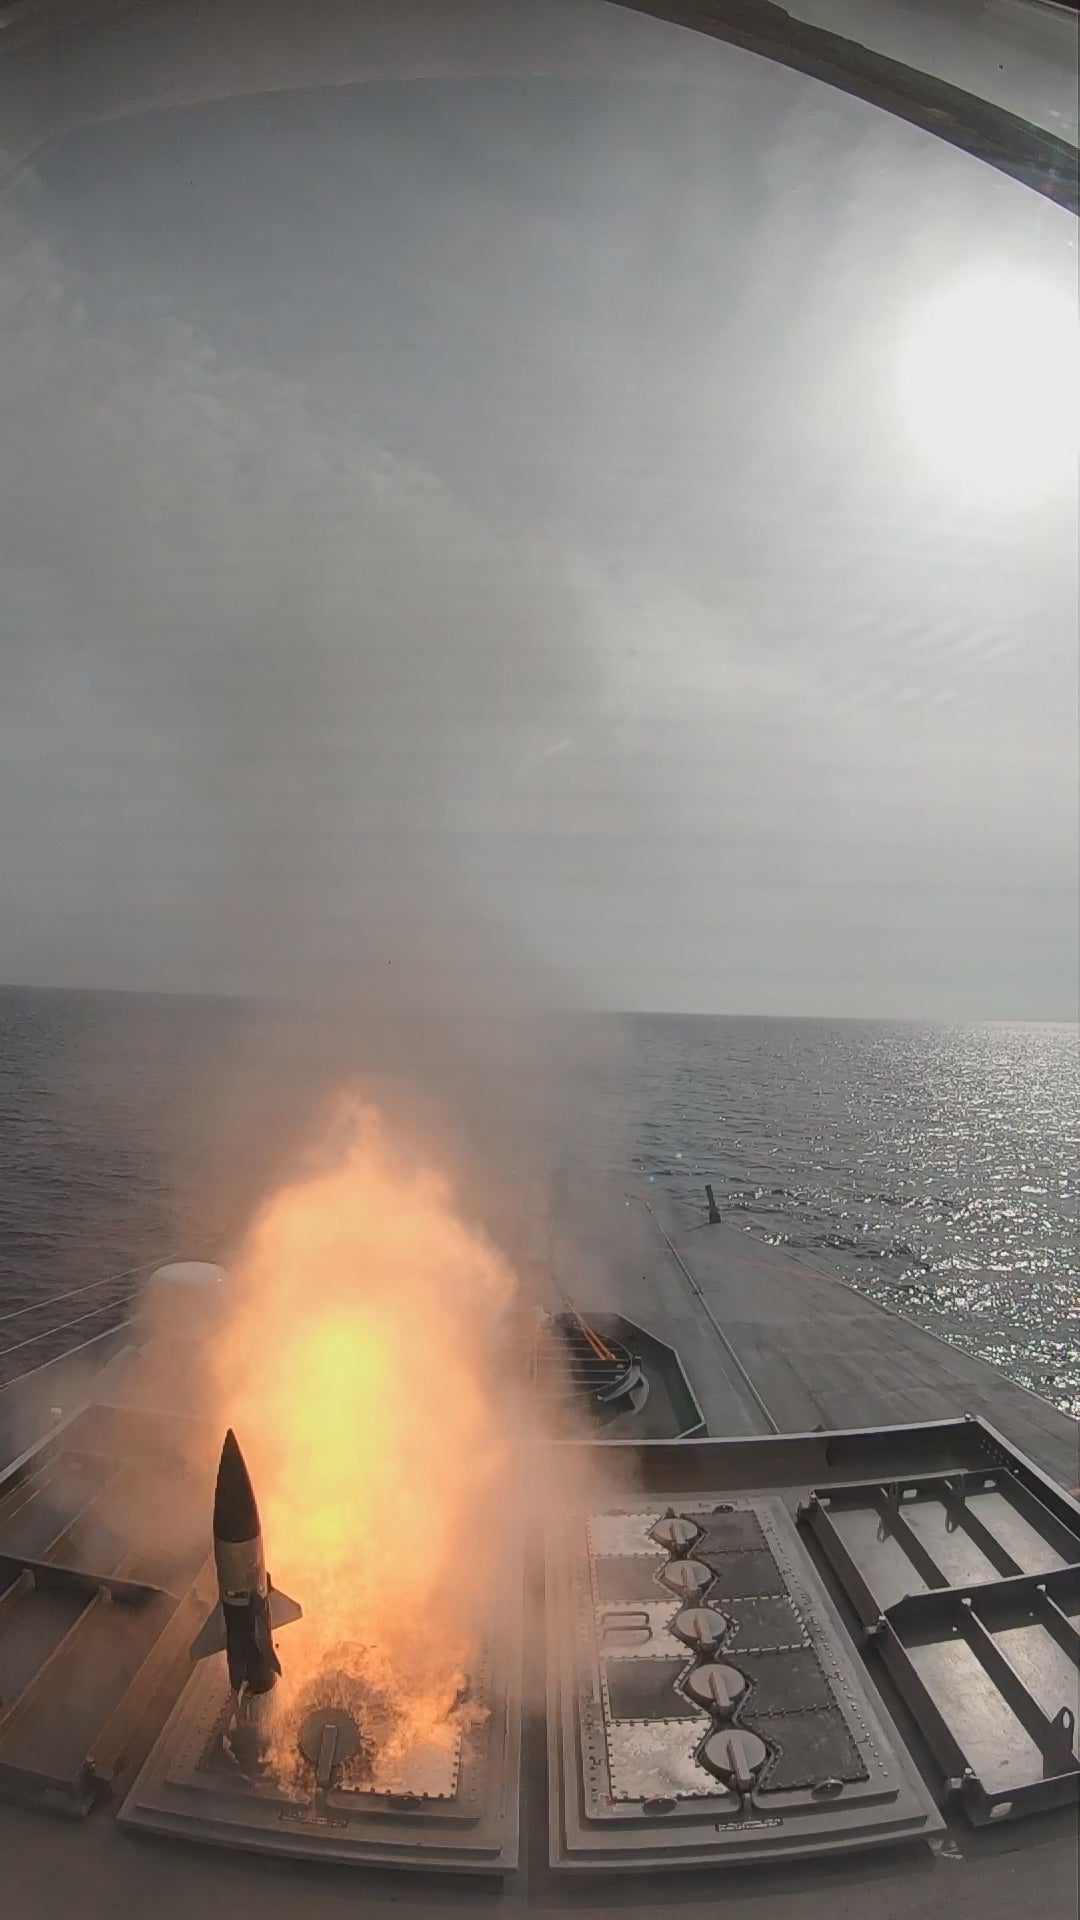 AT SEA - FEBRUARY 21: (----EDITORIAL USE ONLY - MANDATORY CREDIT ISRAELI MINISTRY OF DEFENCE - / HANDOUT" - NO MARKETING NO ADVERTISING CAMPAIGNS - DISTRIBUTED AS A SERVICE TO CLIENTS----) A missile is launched from the Sa'ar 6-class corvette during the series of live-fire tests of the naval version of its Iron Dome missile-defense system, called "C-Dome"at sea on February 21, 2022. (Photo by Israeli Ministry of Defence/Anadolu Agency via Getty Images)